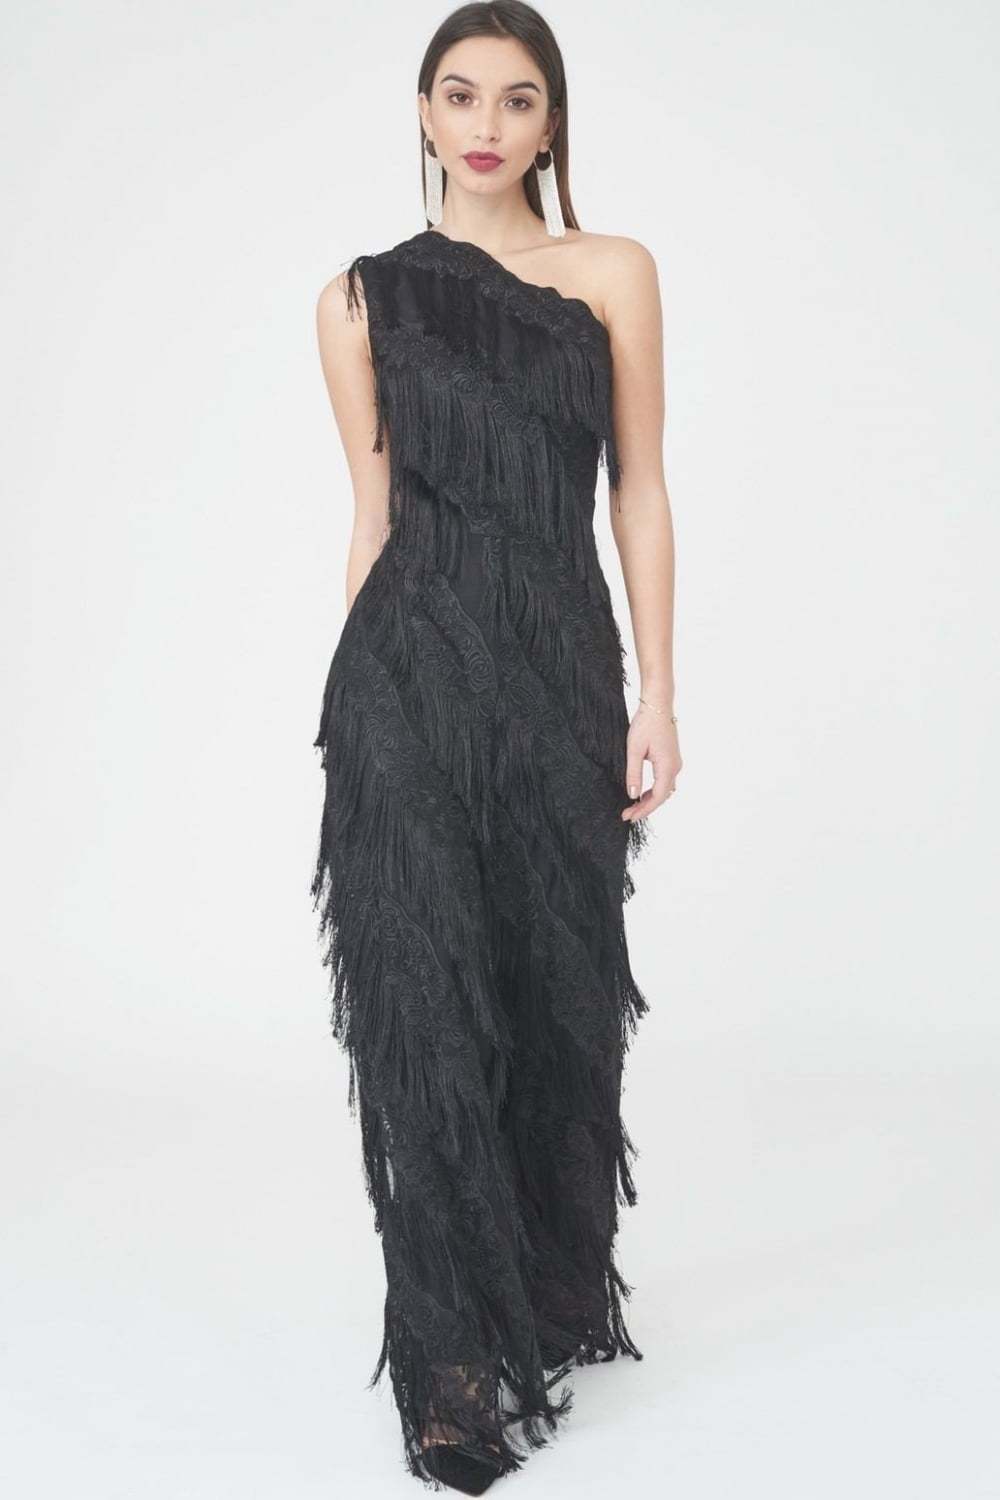 The Black Fringed Lace Jumpsuit - Full Front View